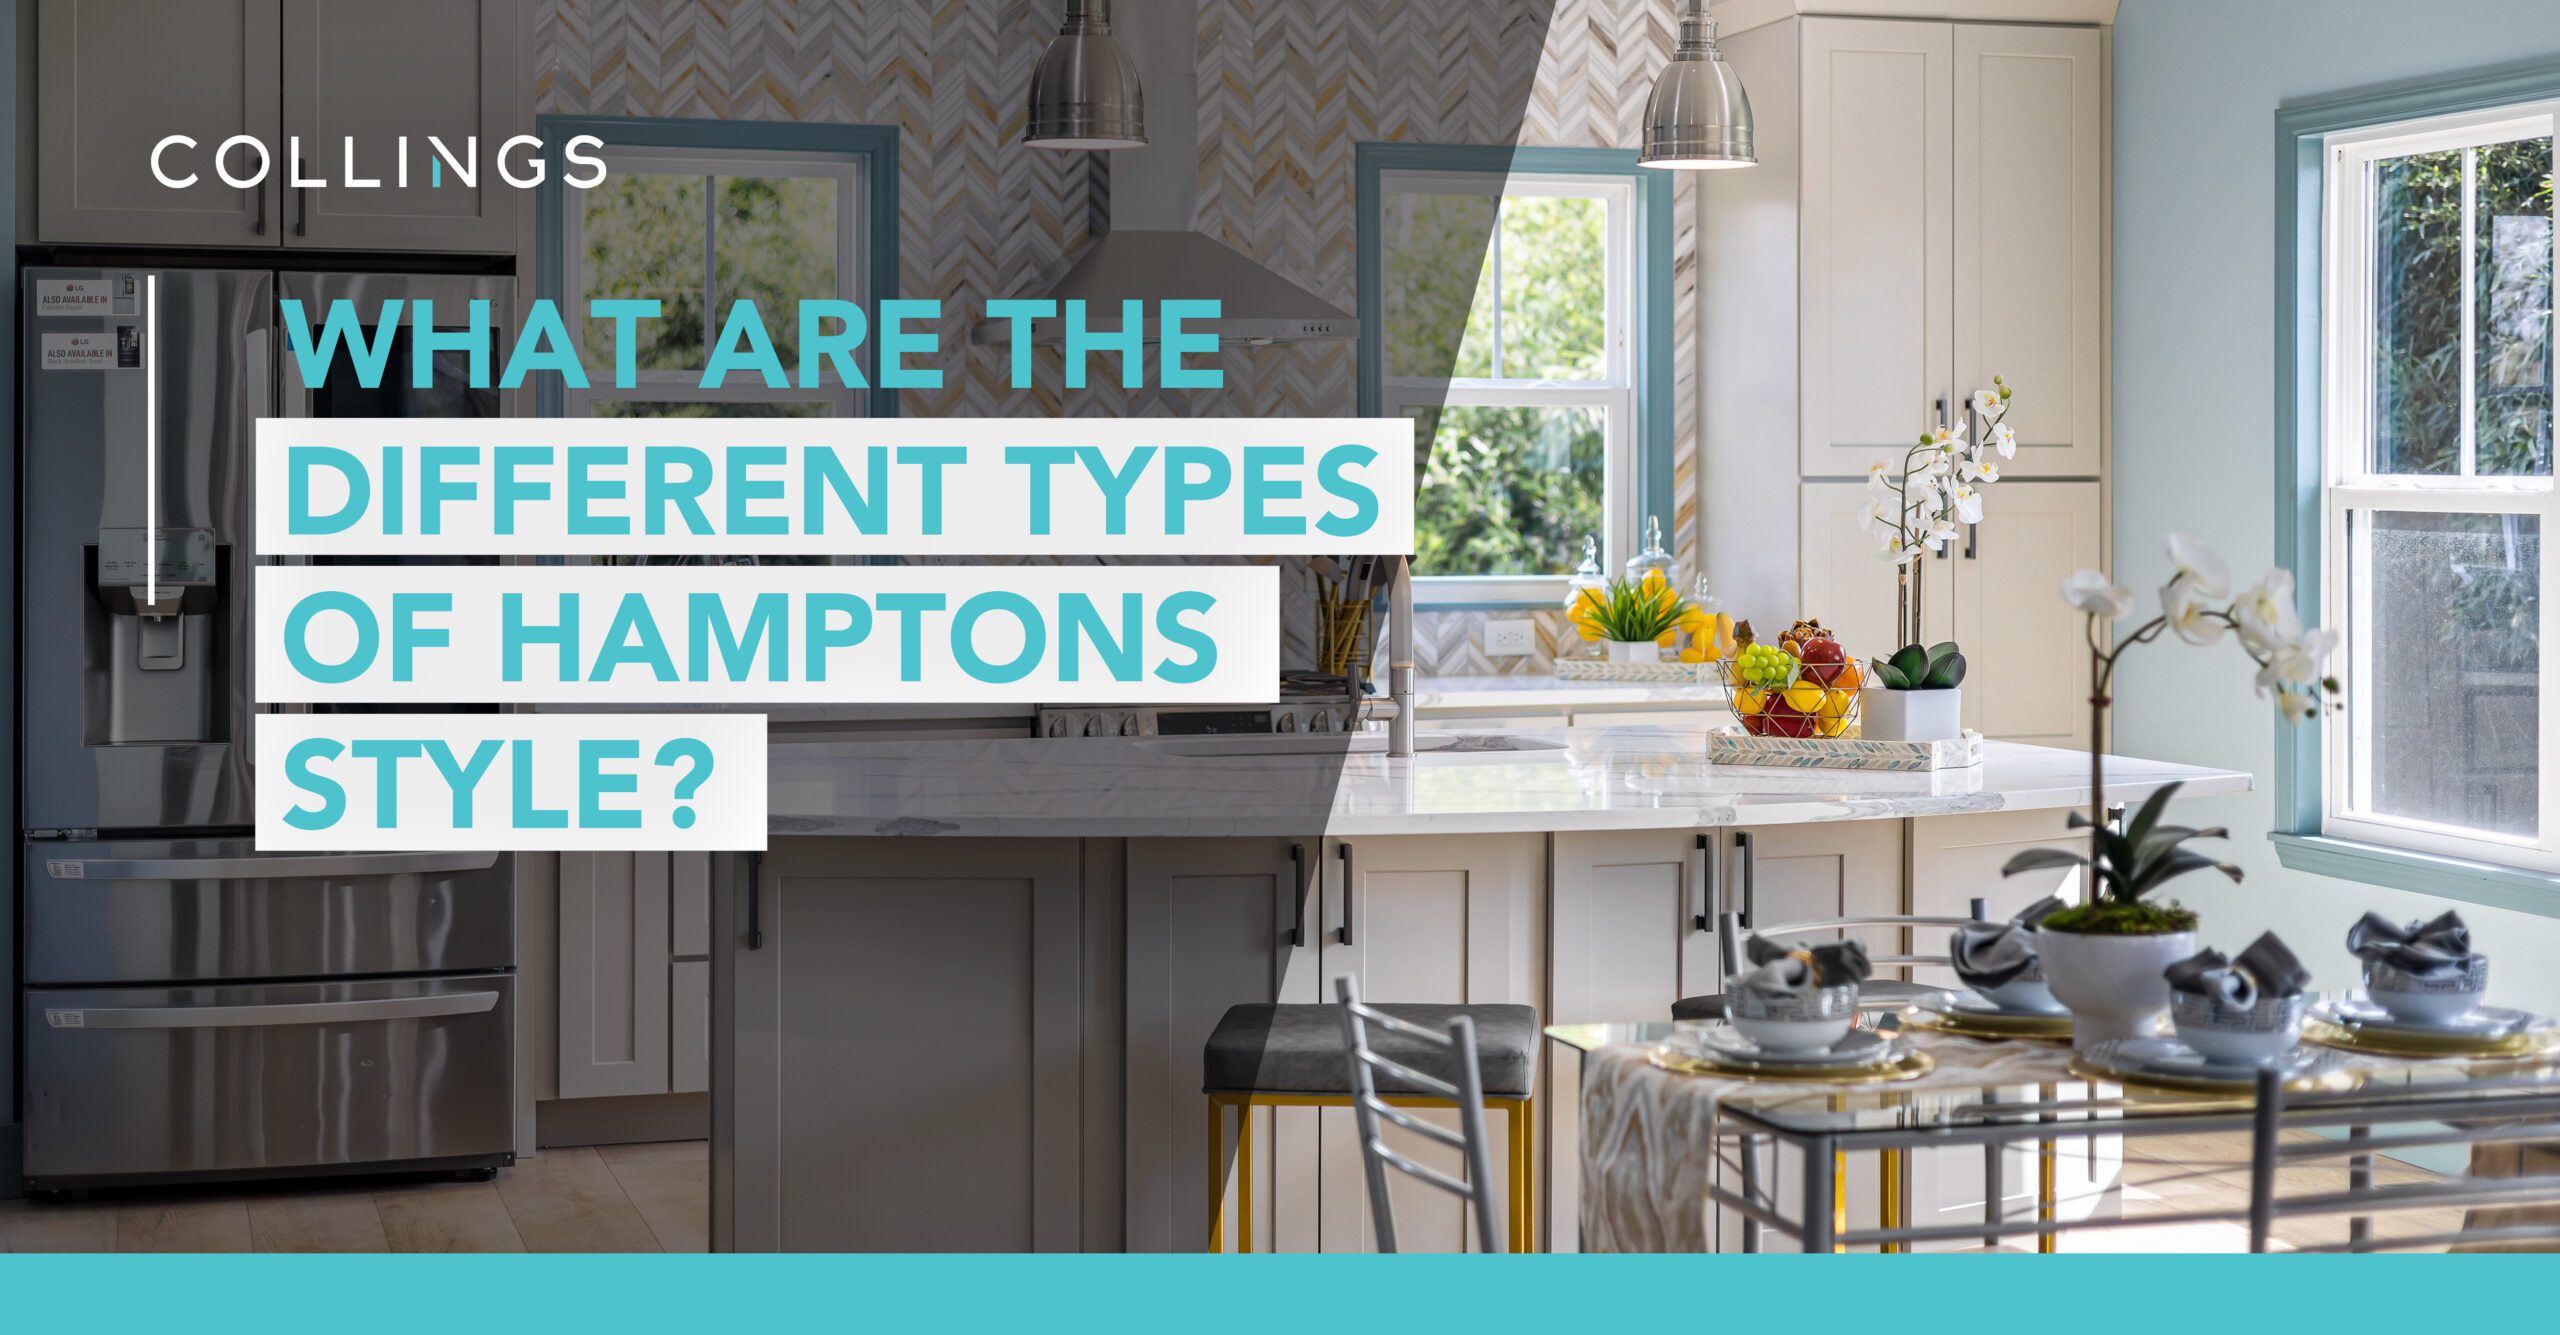 A Hampton style kitchen showcasing diverse styles and design elements.

